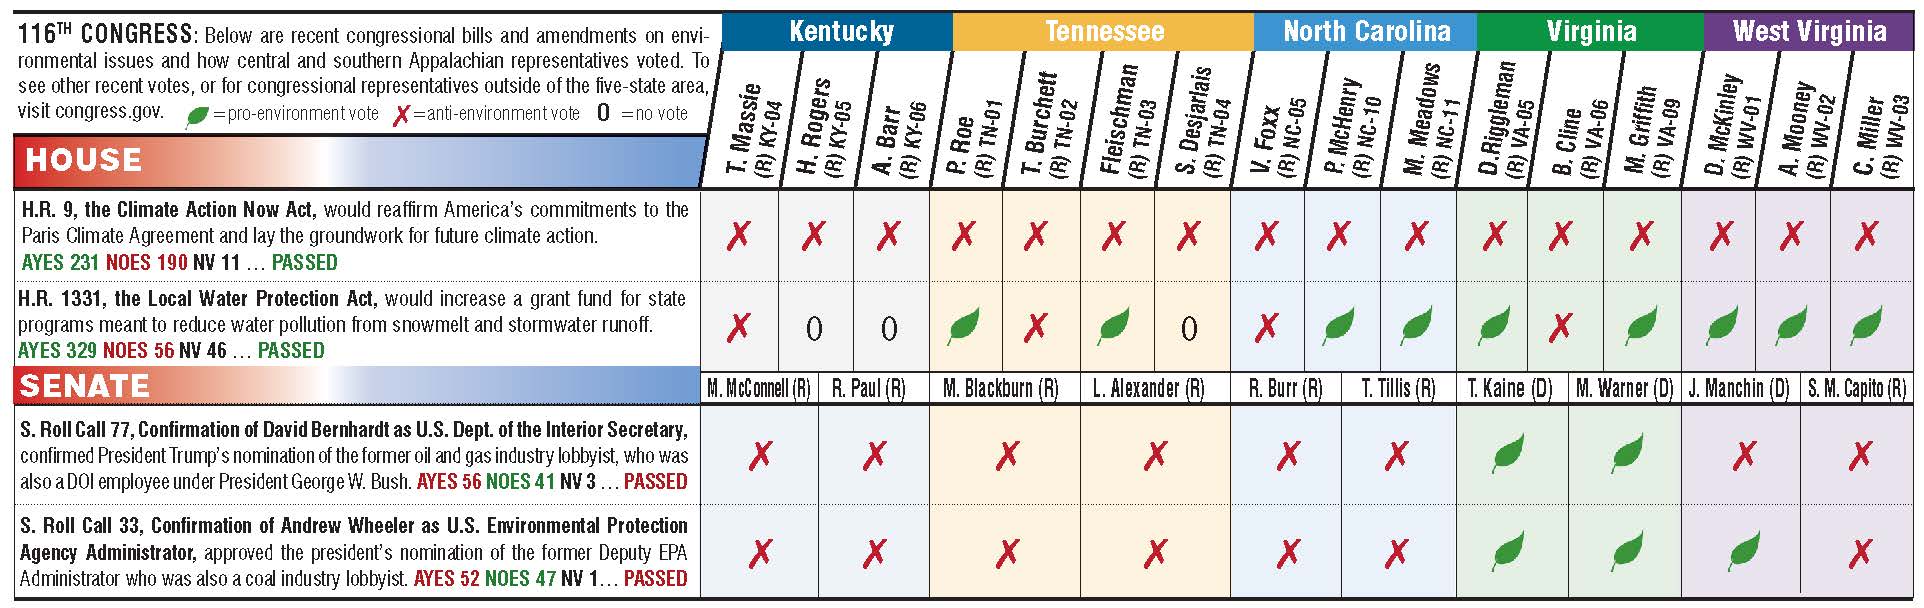 Chart showing how Appalachian legislators voted in April and May 2019.